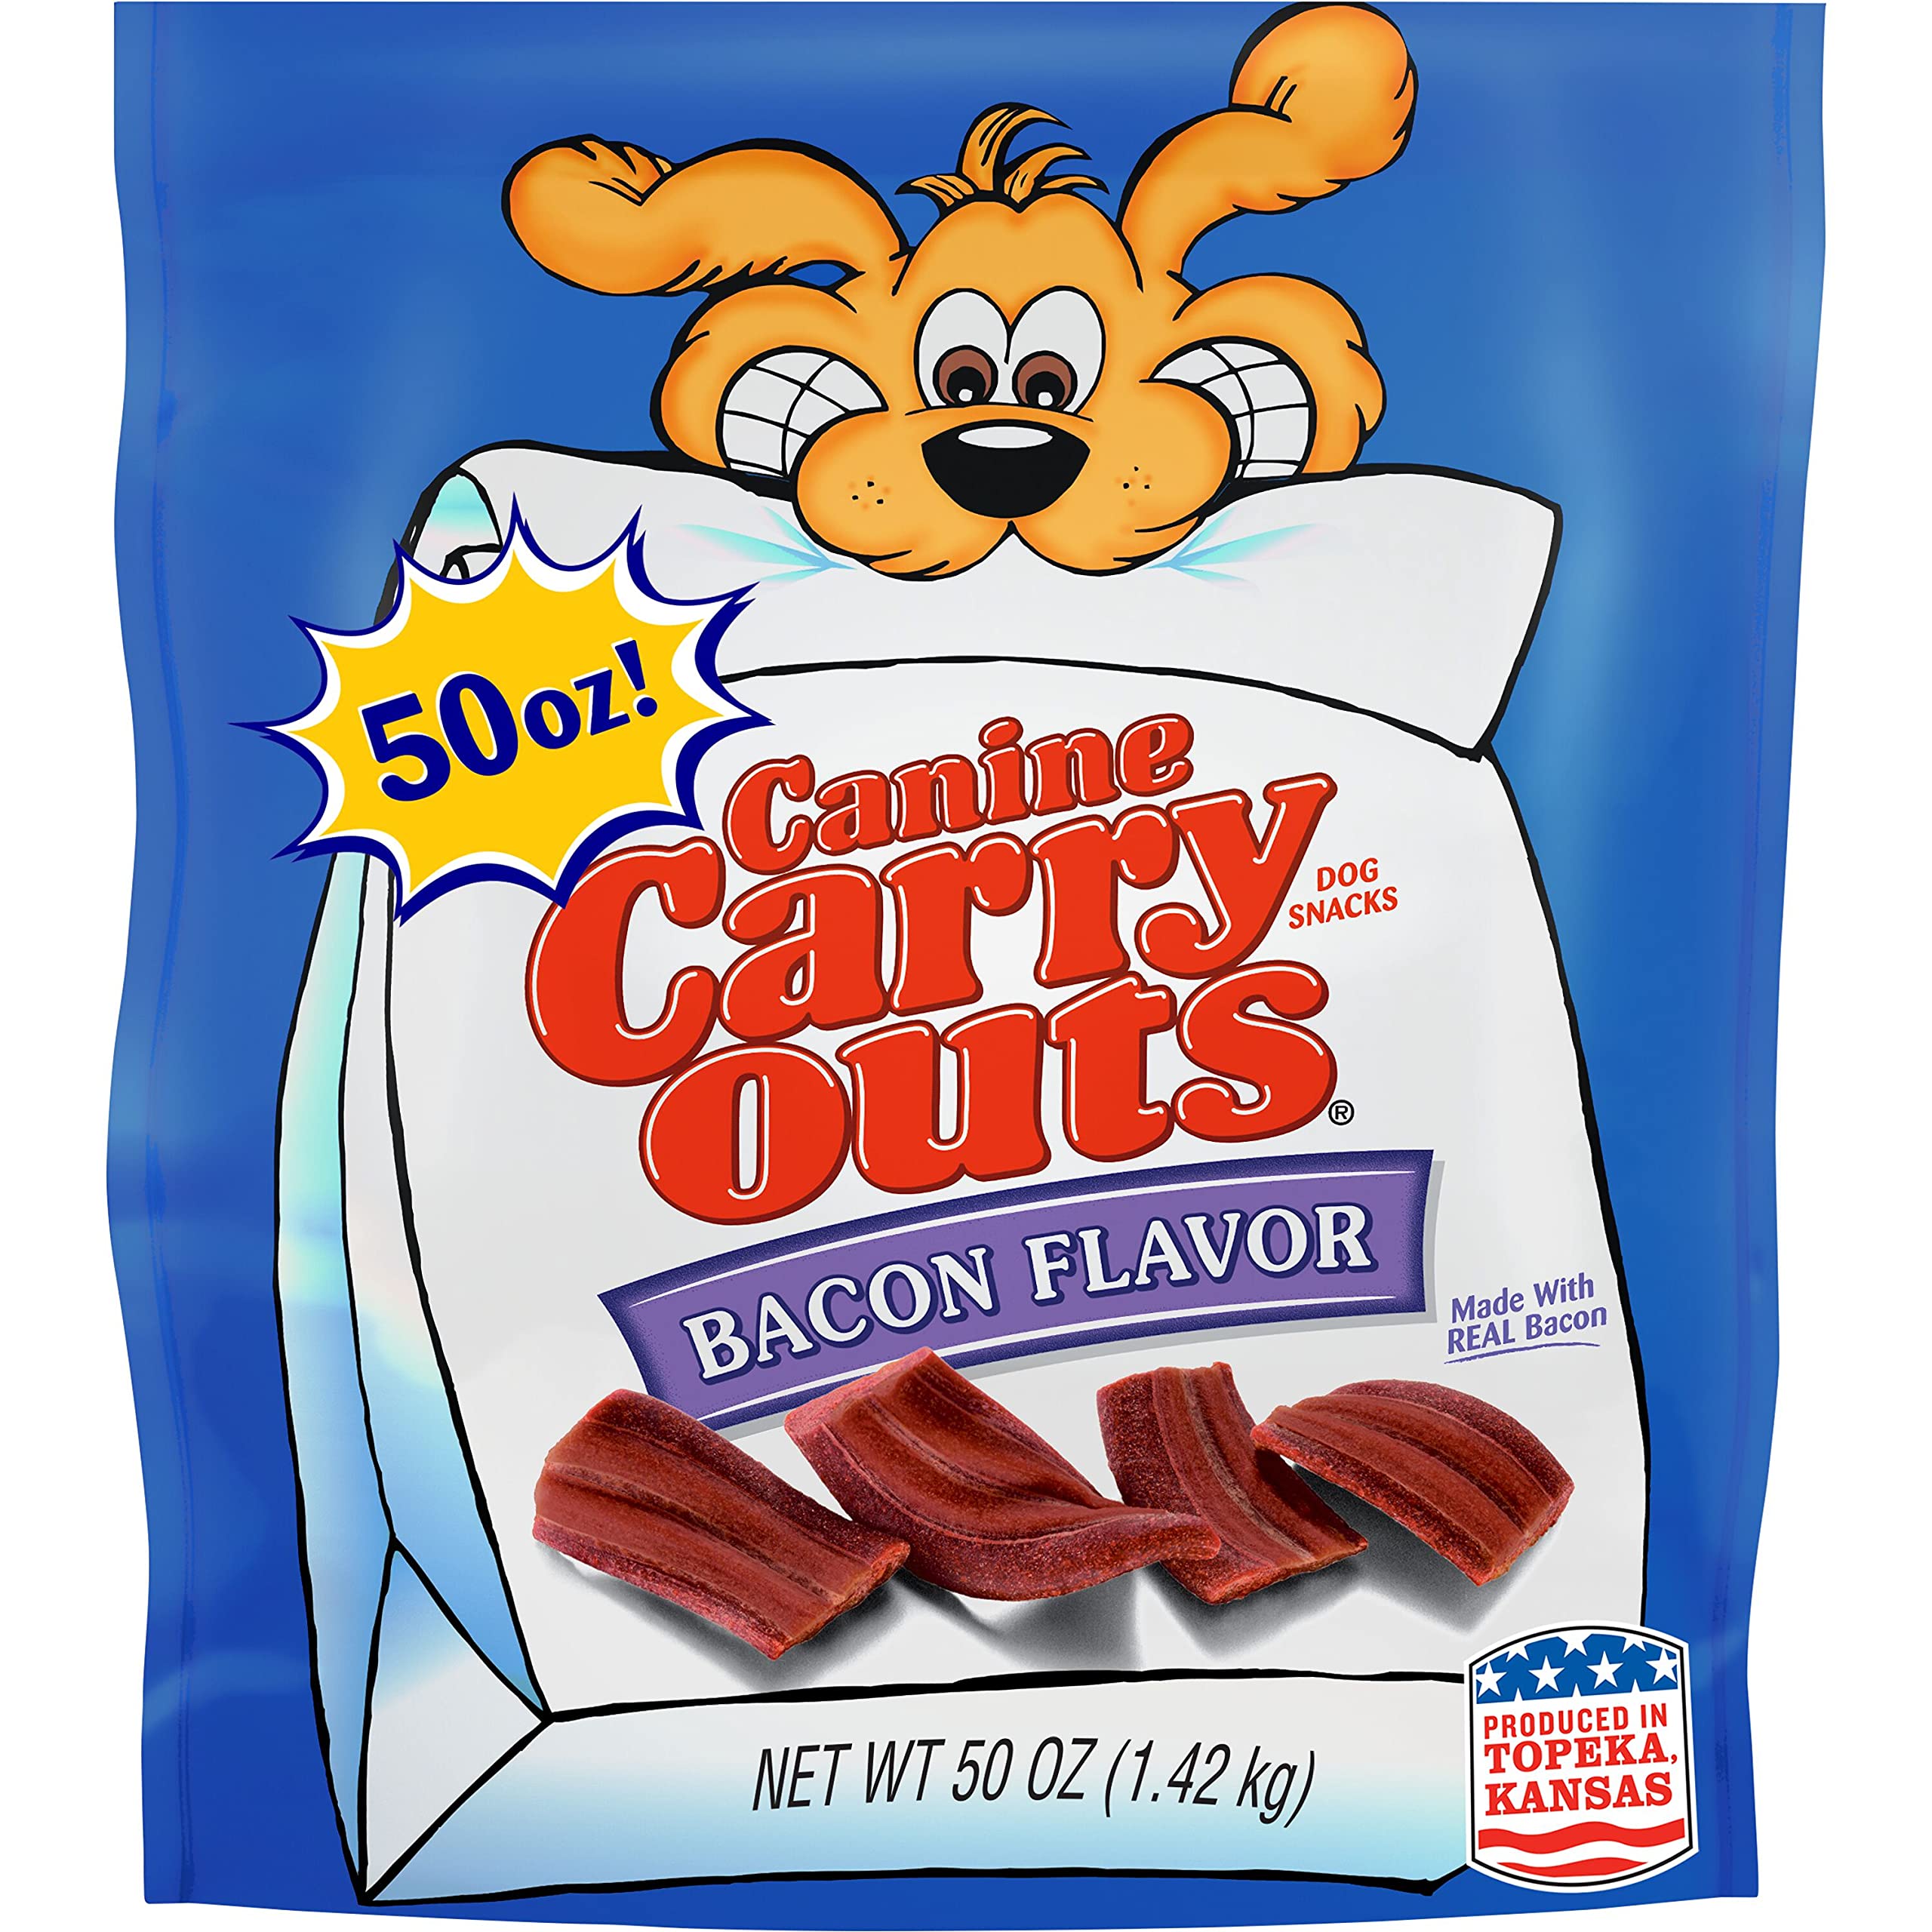 Book Cover Canine Carry Outs Bacon Flavor Dog Treats, 50 Ounce Bag (Discontinued by Manufacturer)